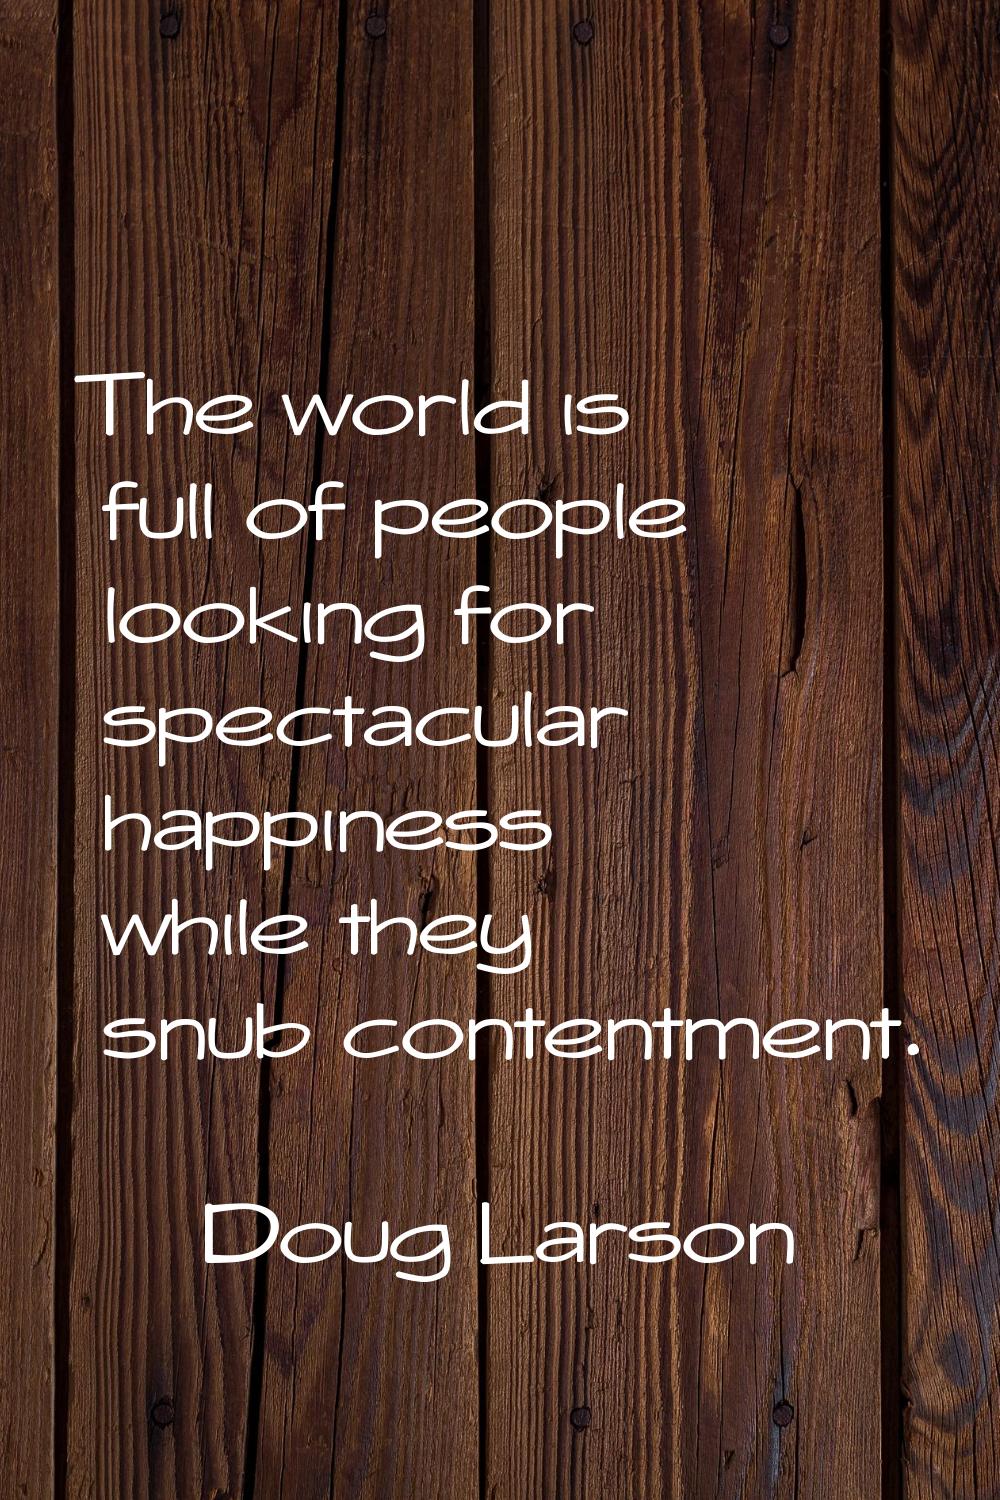 The world is full of people looking for spectacular happiness while they snub contentment.